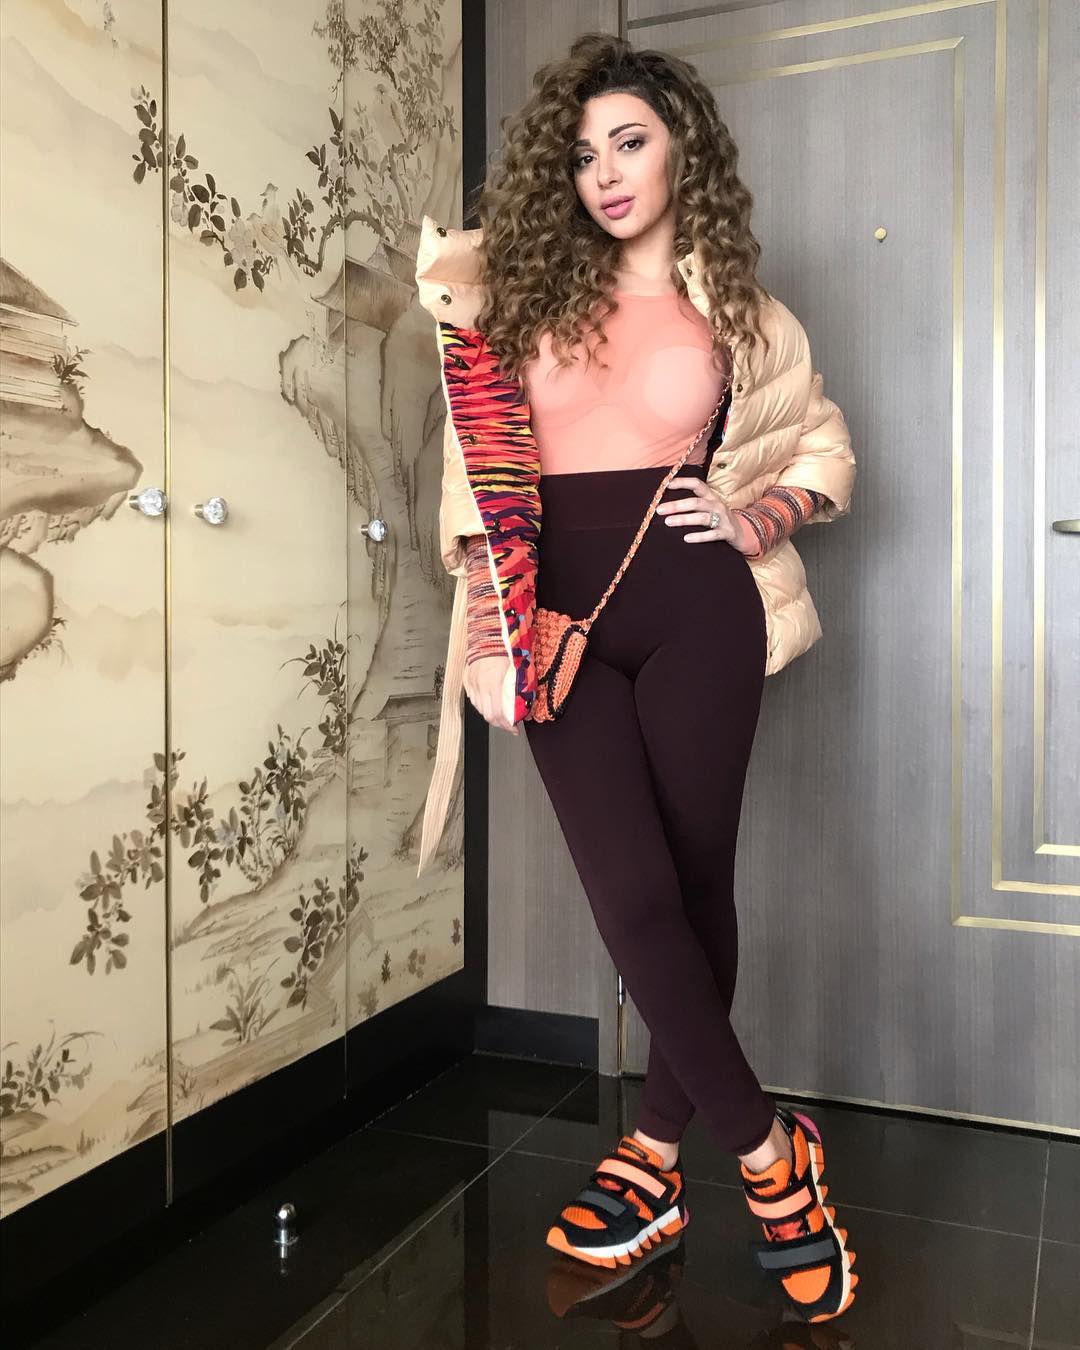 49 Hot Pictures Of Myriam Fares Which Will Keep You Up At Nights | Best Of Comic Books